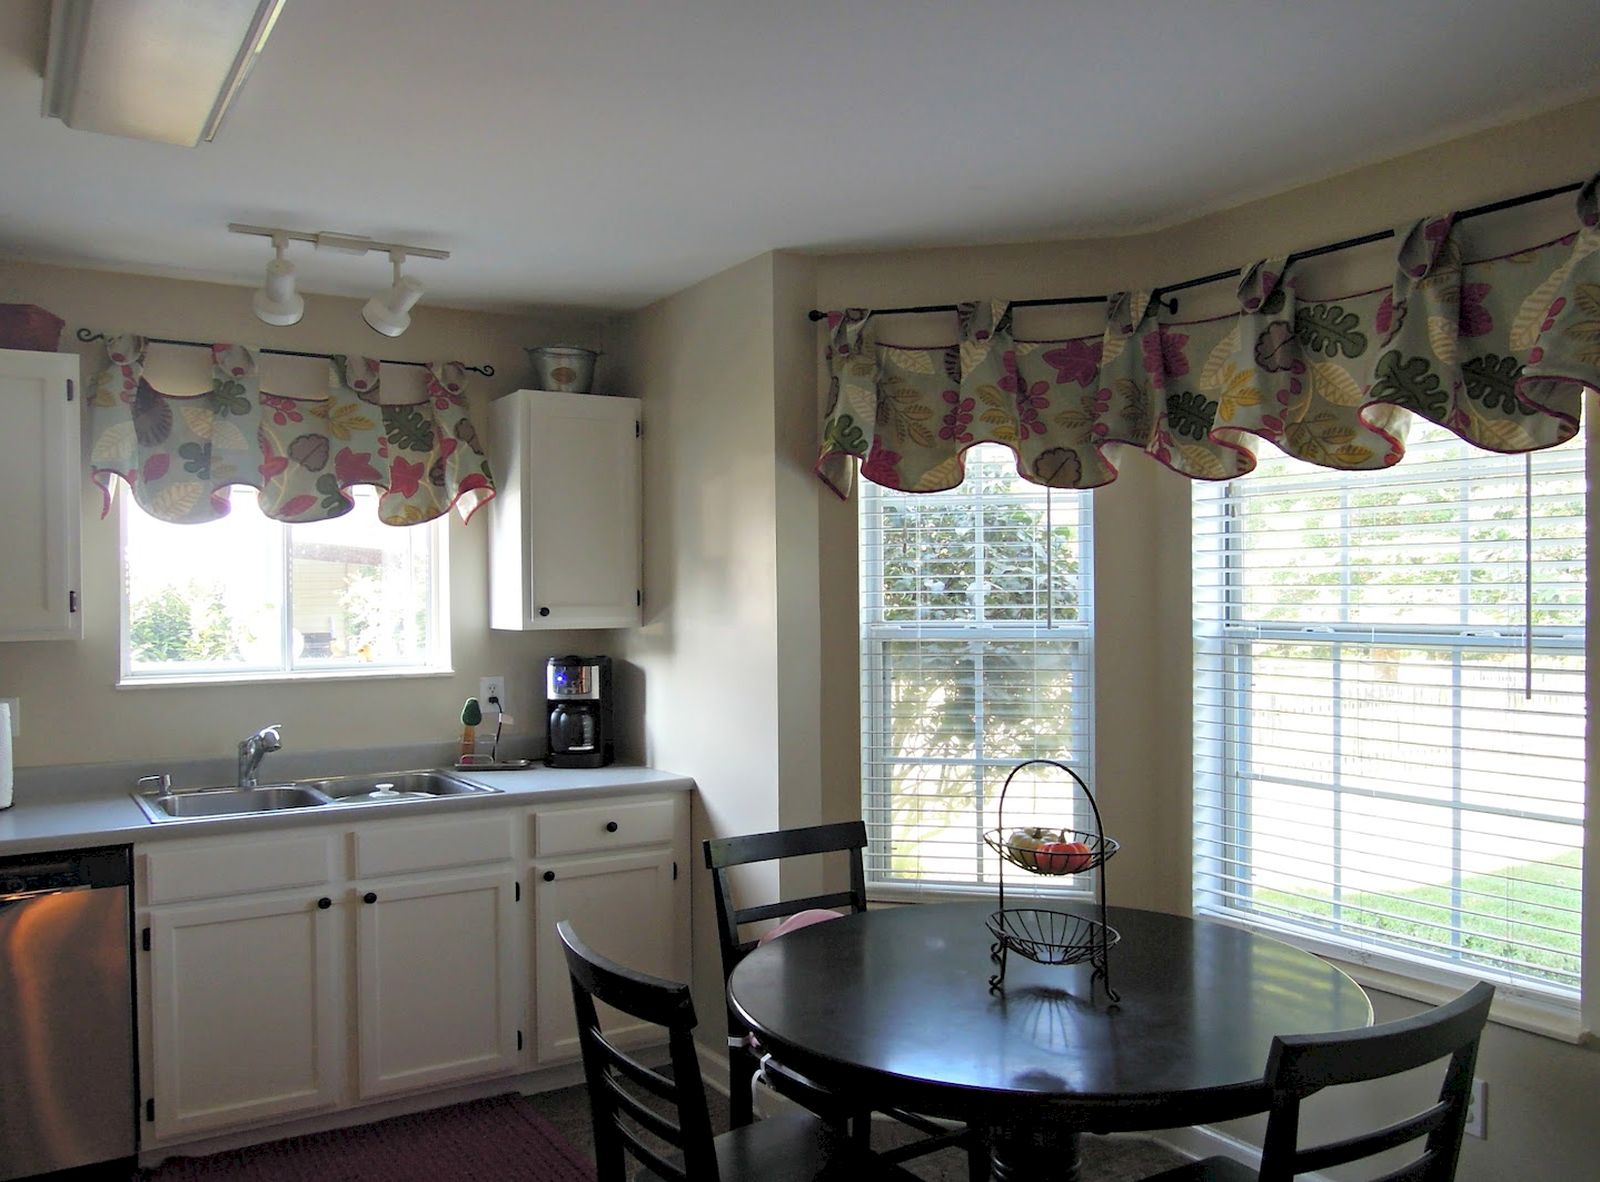 Valance Curtains For Kitchen photo - 4